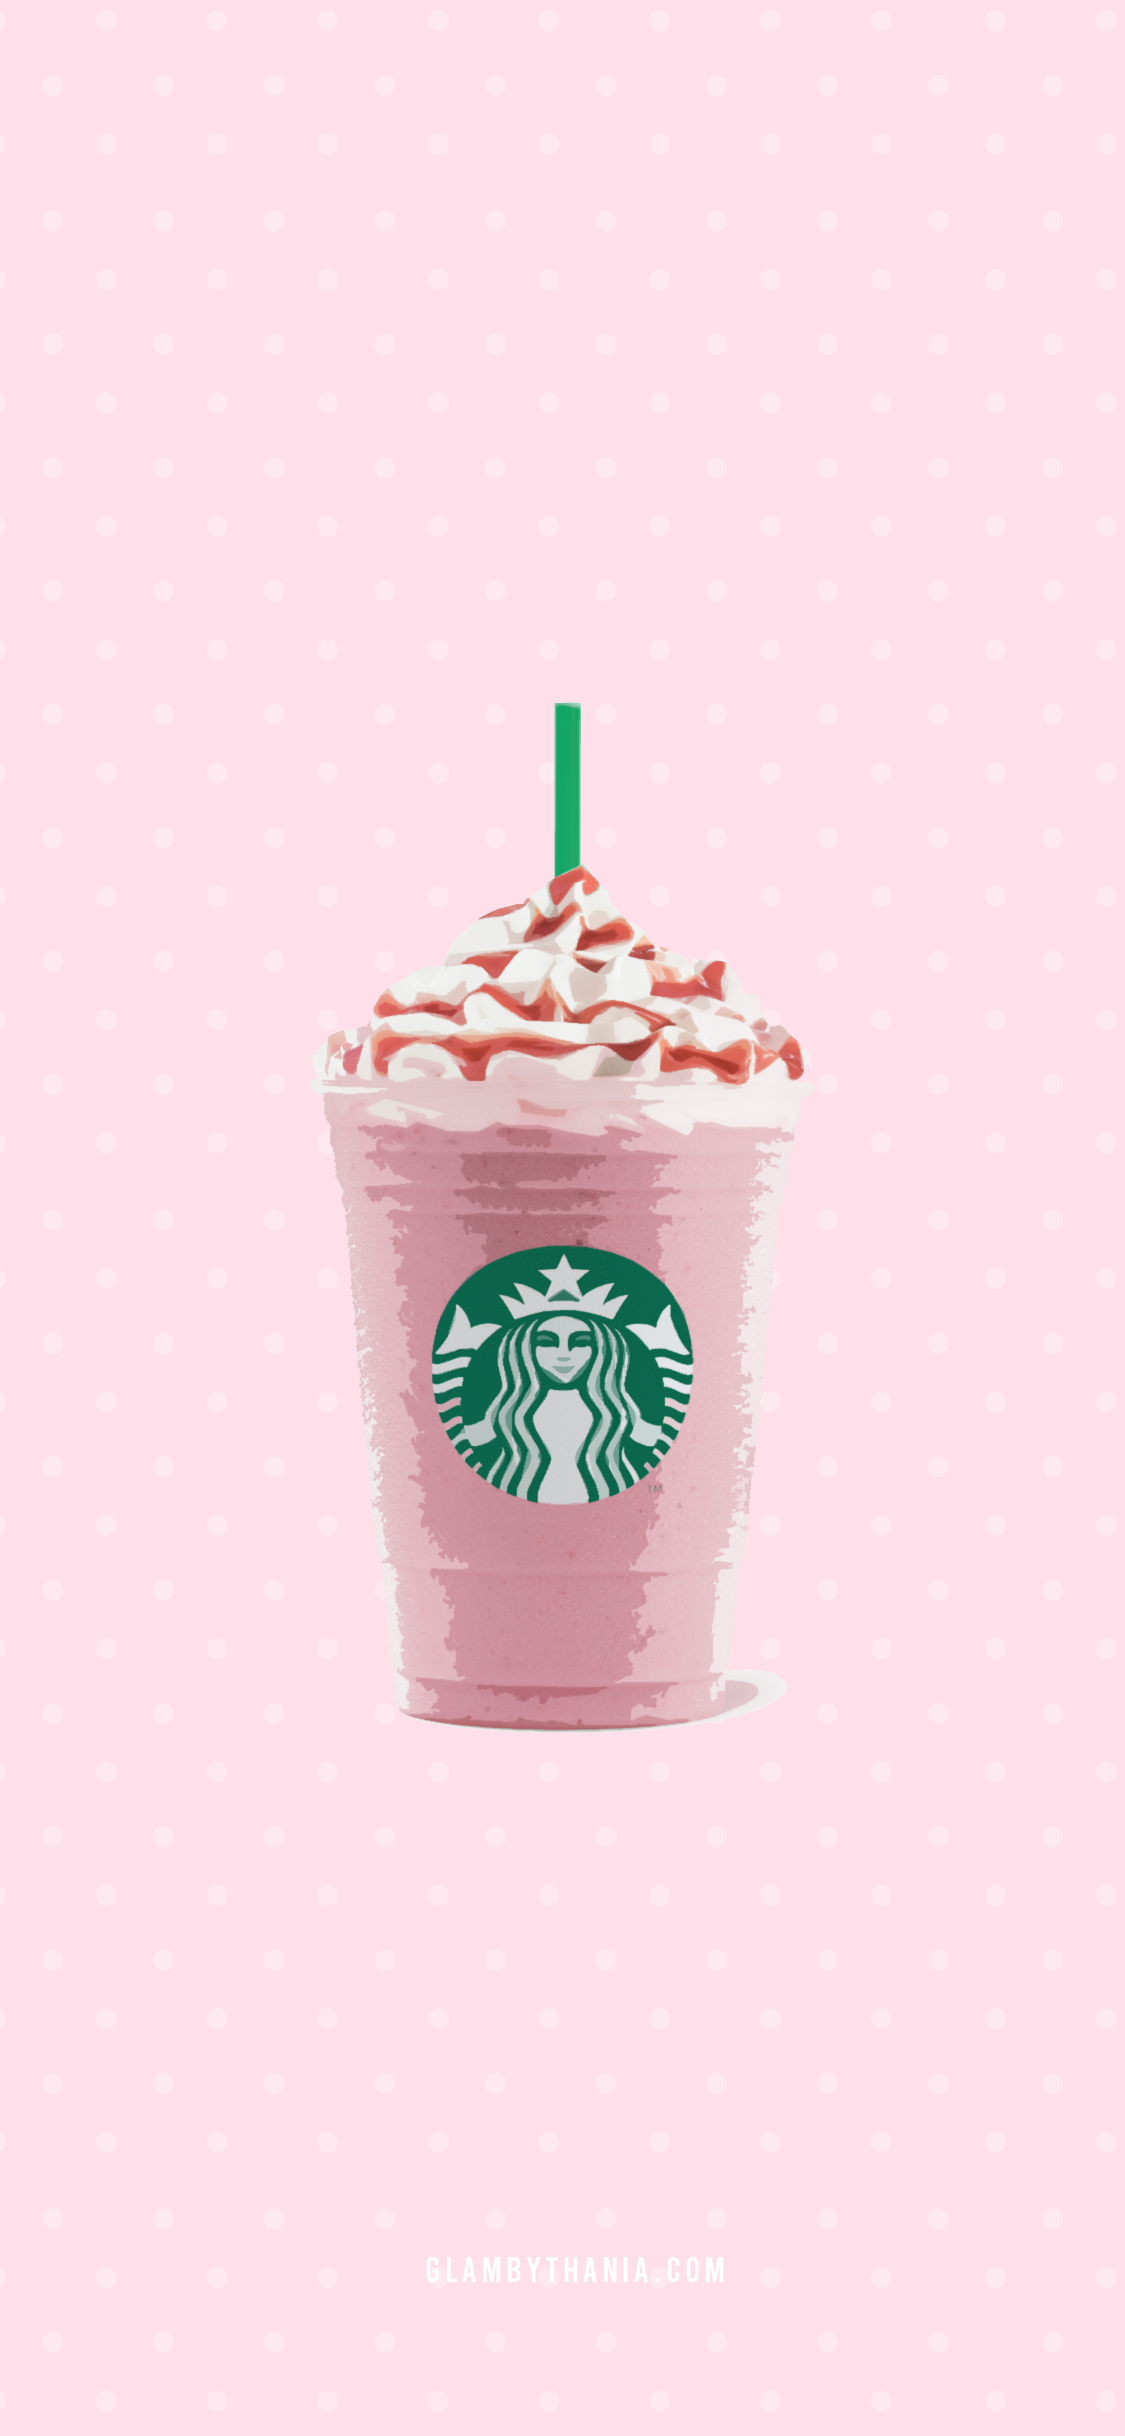 Free designer girly pink iphone wallpapers starbucks wallpaper iphone wallpaper girly pink wallpaper iphone